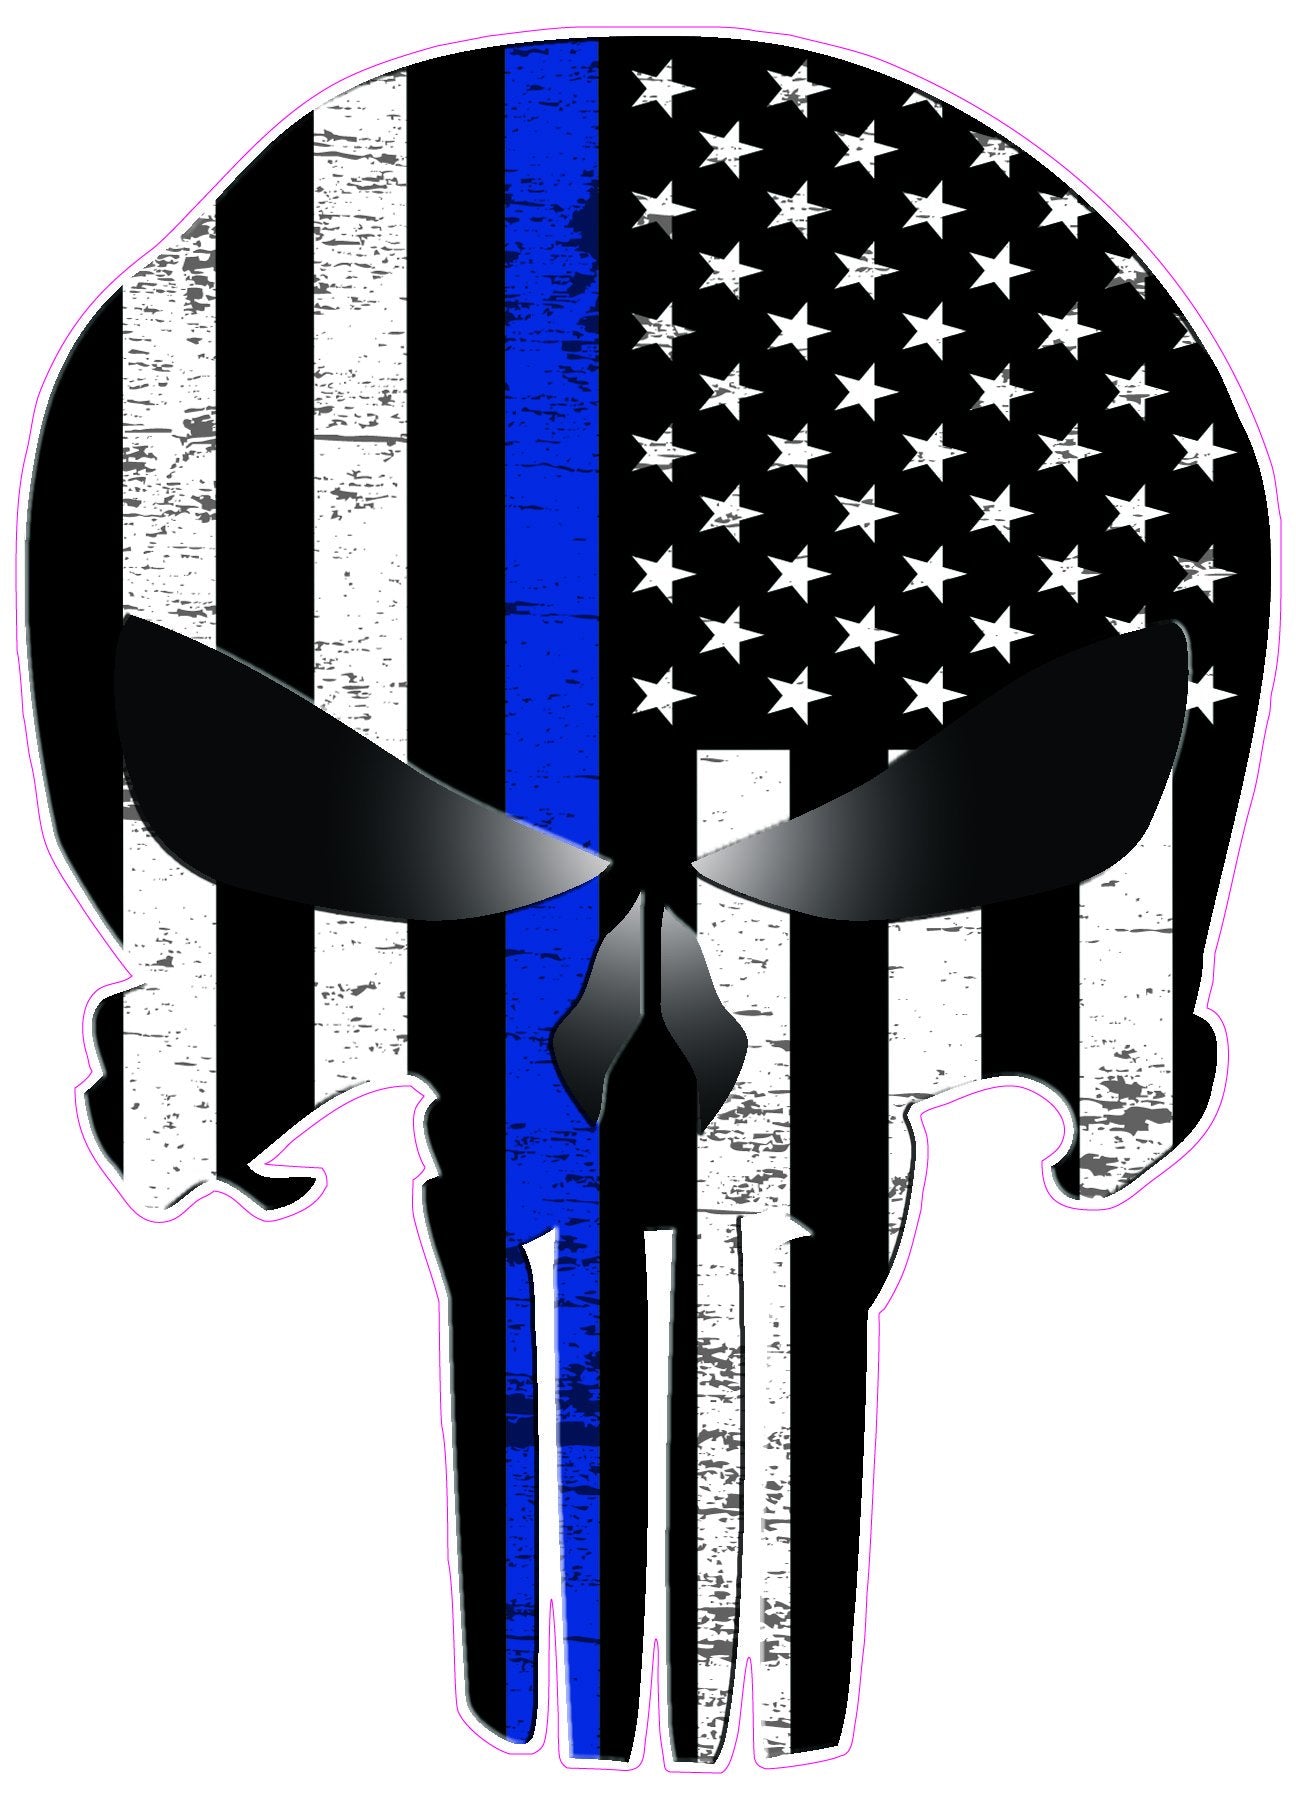 Skull American Subdued Thin Blue Line Decal - American flag stickers, American Punisher Waving Thin Blue Line Decal, automotive decals, automotive stickers, decals, First responders Law Enforcement decals, law enforcement, police decal, police decals, police skull, retired police, skull decal, skull sticker, subdued police skull, thin blue line, Thin Blue Line Decal, vehicle decals, Vehicle stickers, window decal, window decals, window sticker, window stickers, woo_import_1 | American Patriots D